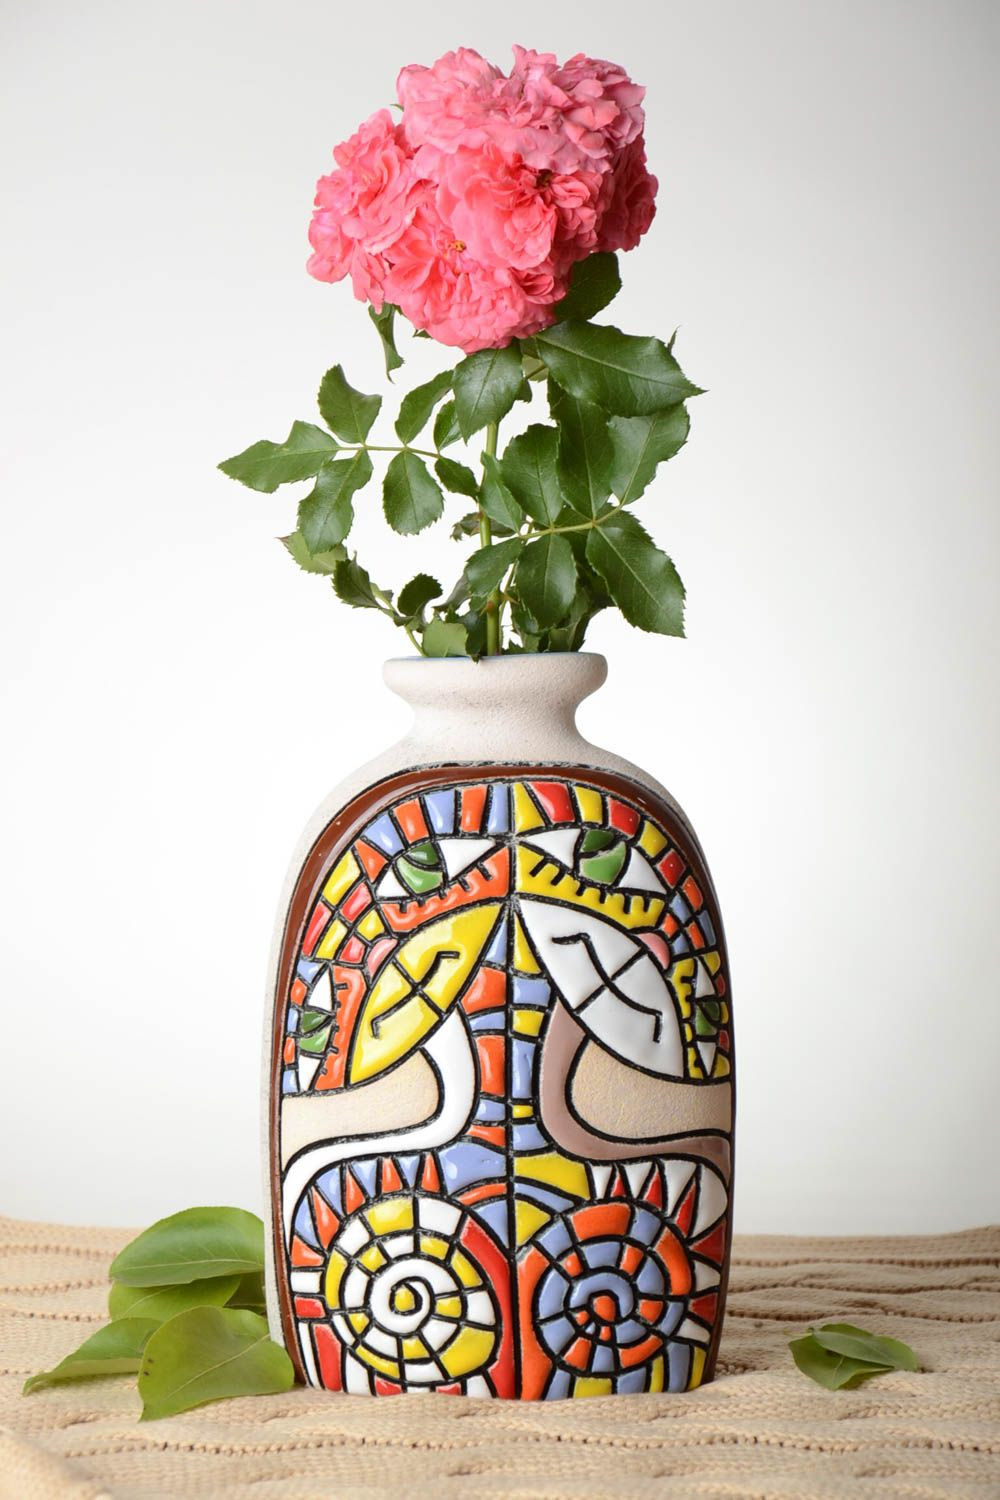 11 Wonderful Ceramic Vases Handmade 2024 free download ceramic vases handmade of beautiful flower vase design flowers healthy throughout vases beautiful handmade ceramic vase decorative flower vase design pottery works madeheart